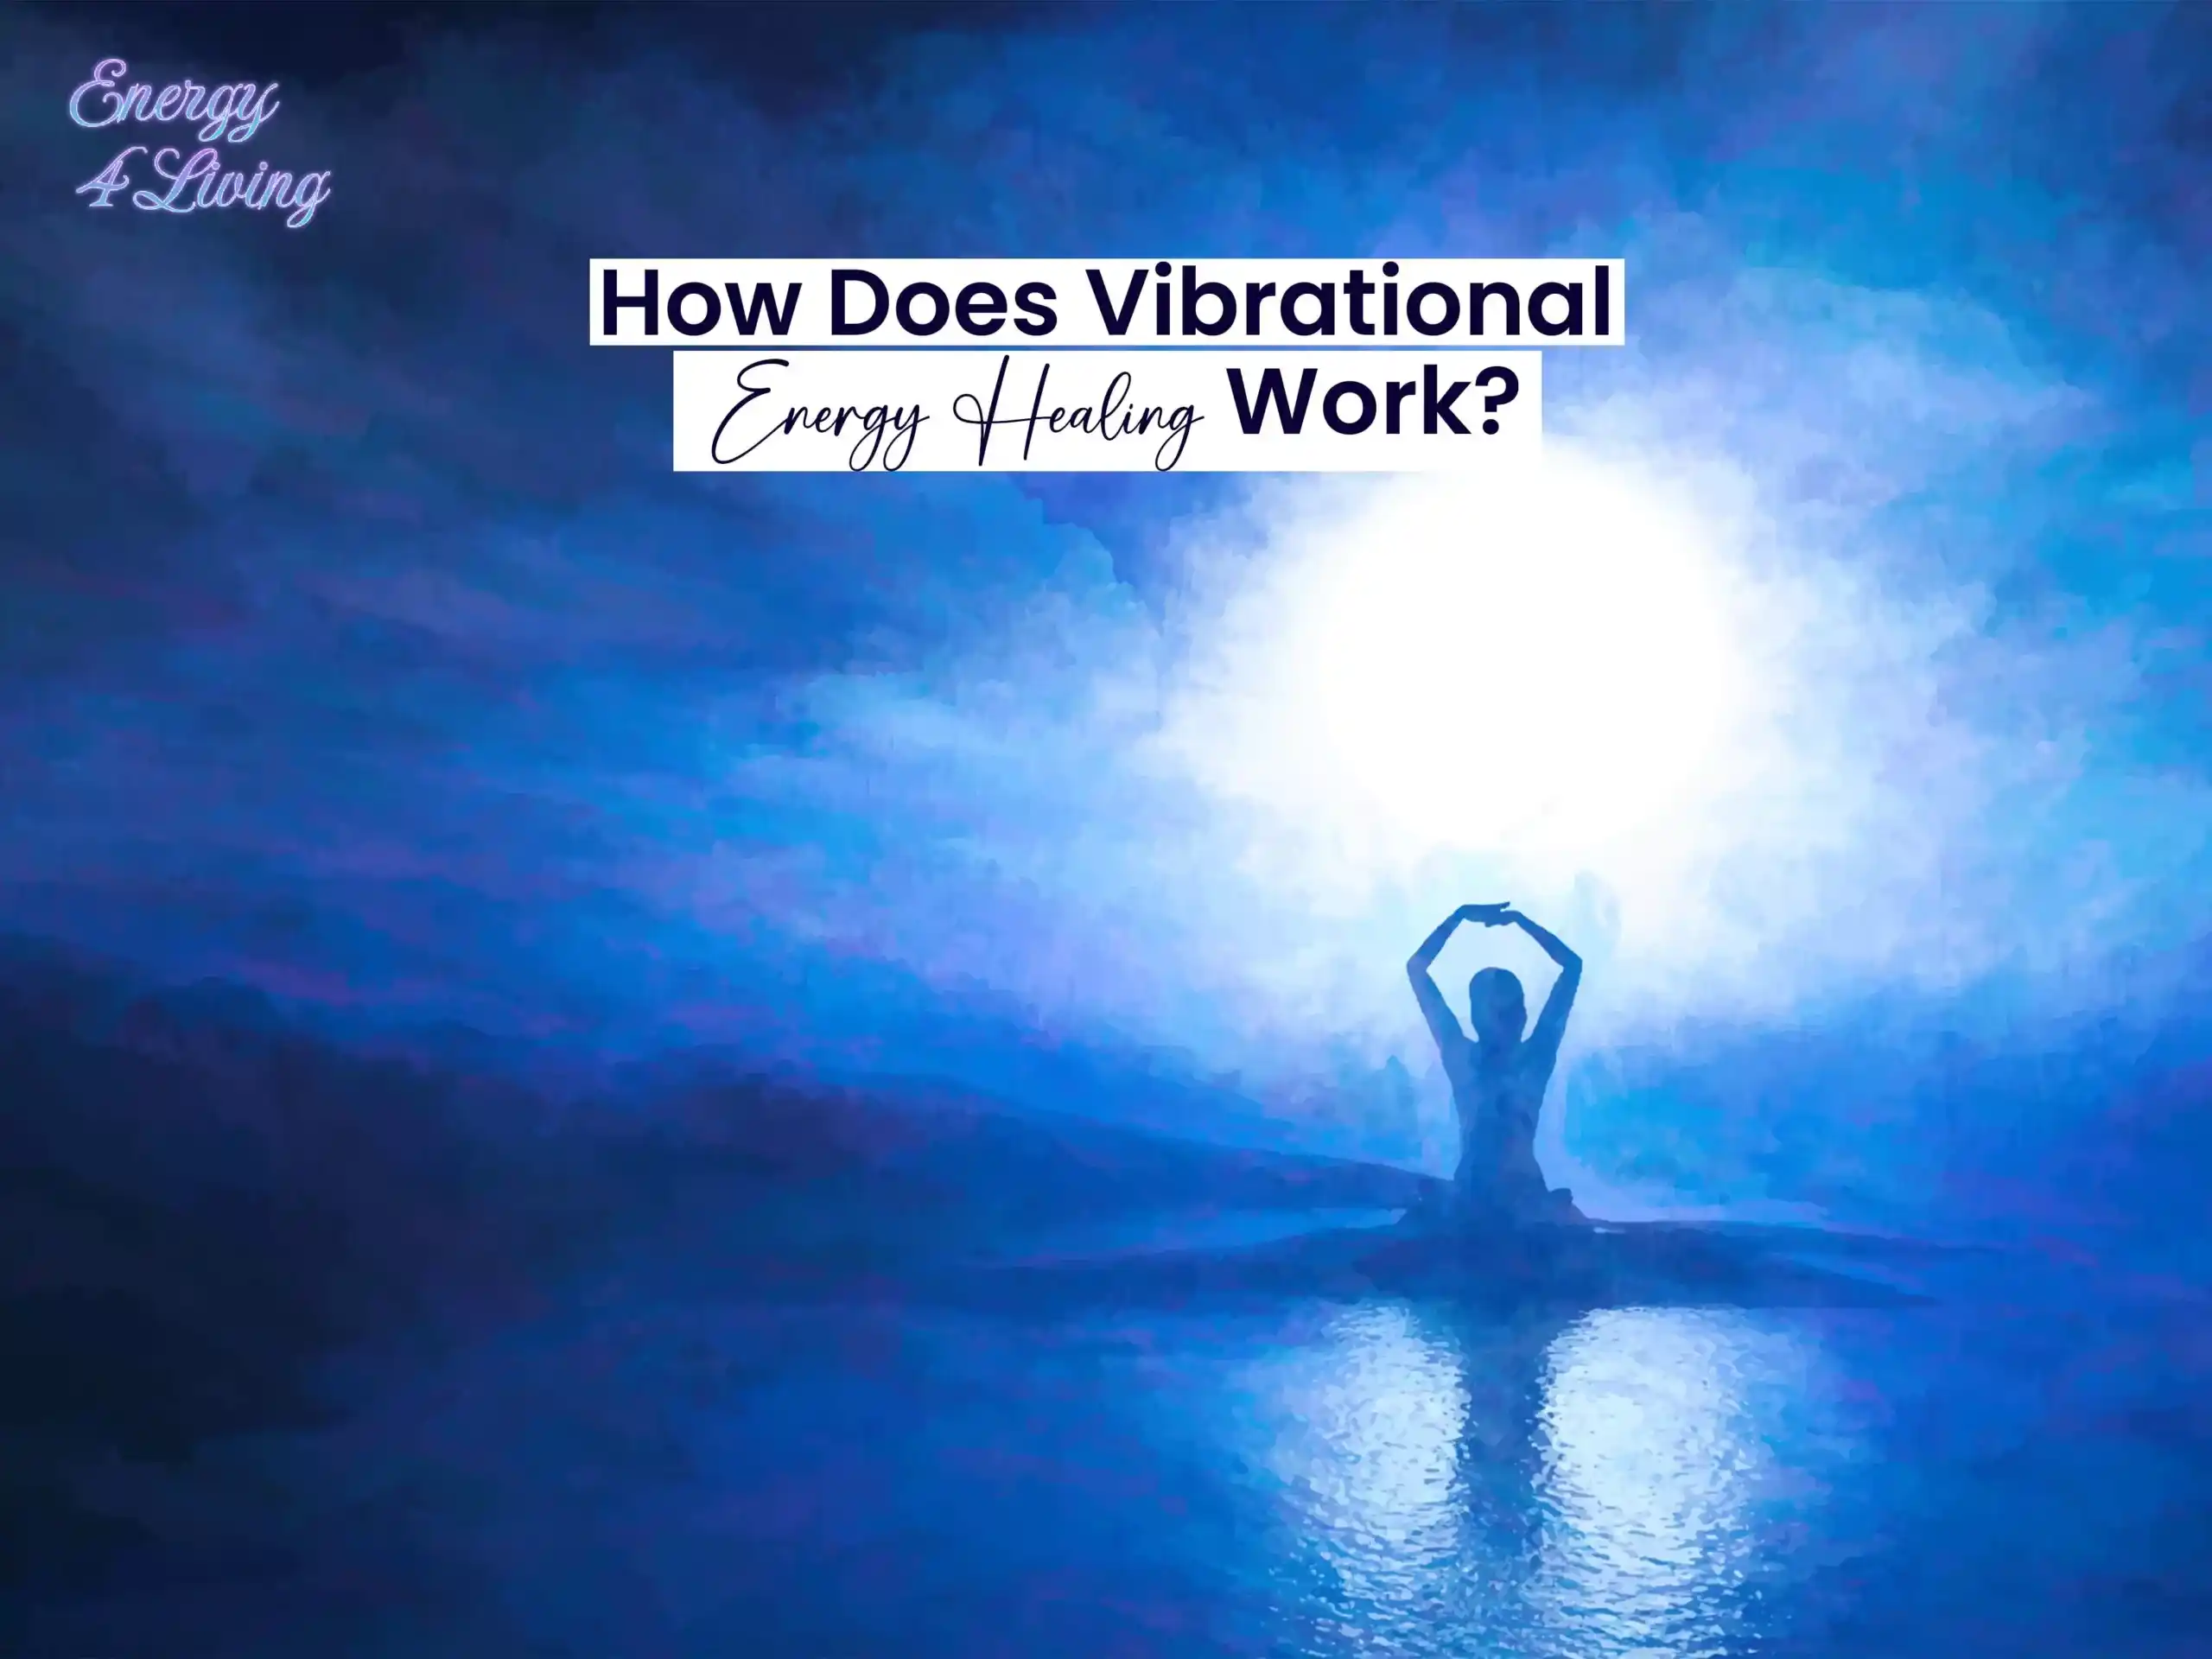 How Does Vibrational Energy Healing Work